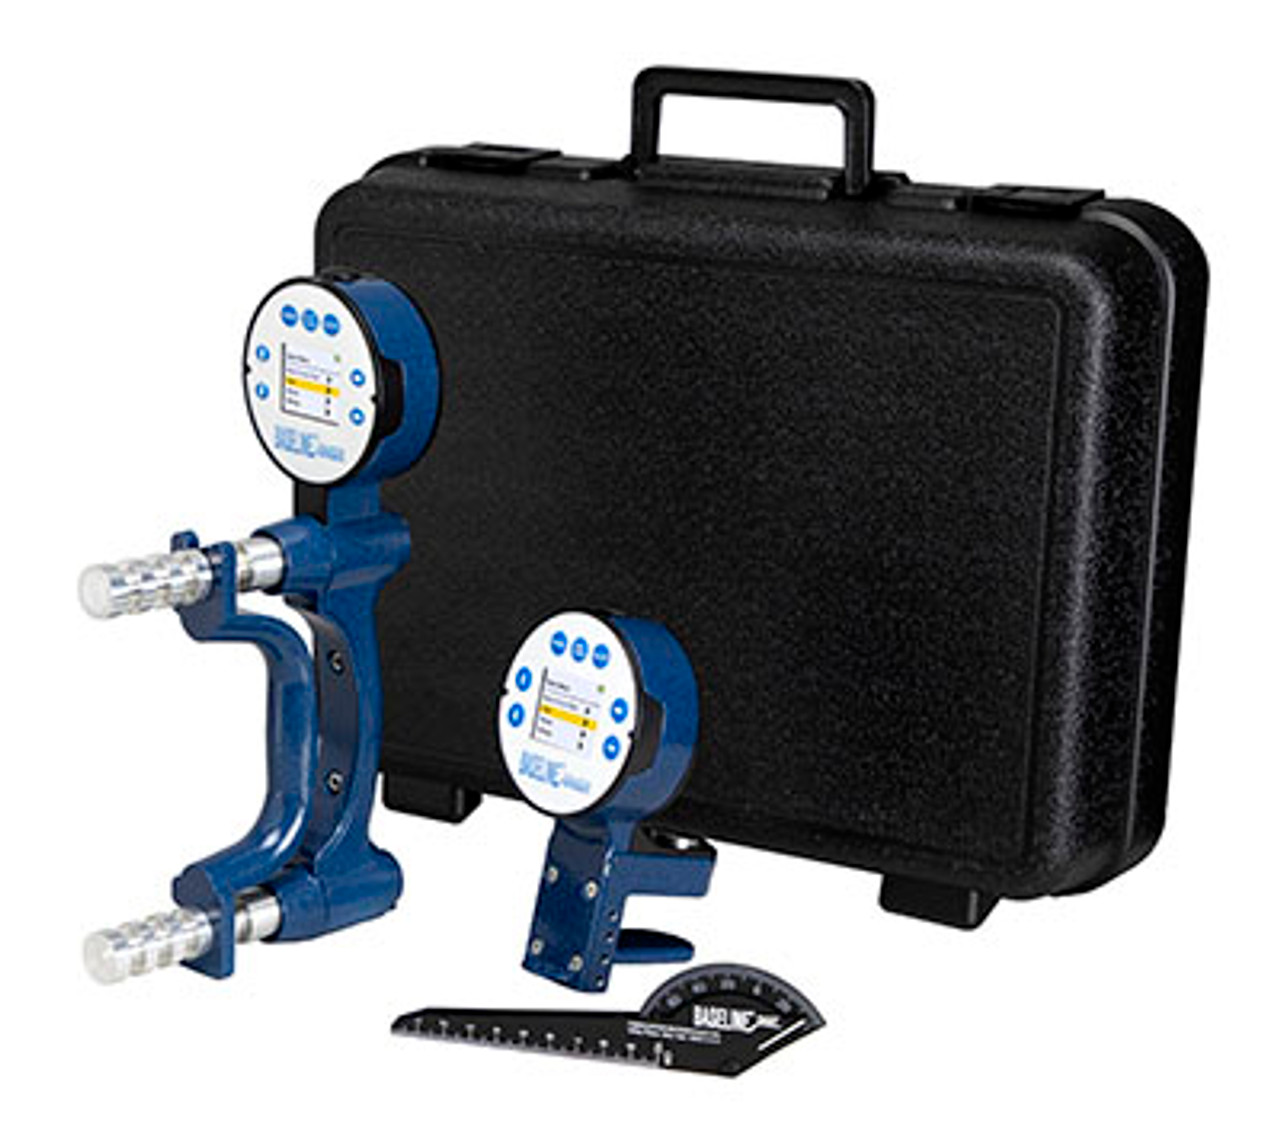 https://cdn11.bigcommerce.com/s-13ttxa/images/stencil/1280x1280/products/20767/23167/Baseline_BIMS_Digital_5-Position_Dynamometer_3-Piece_Hand_Evaluation_Set_with_Case__07388.1641427080.jpg?c=2